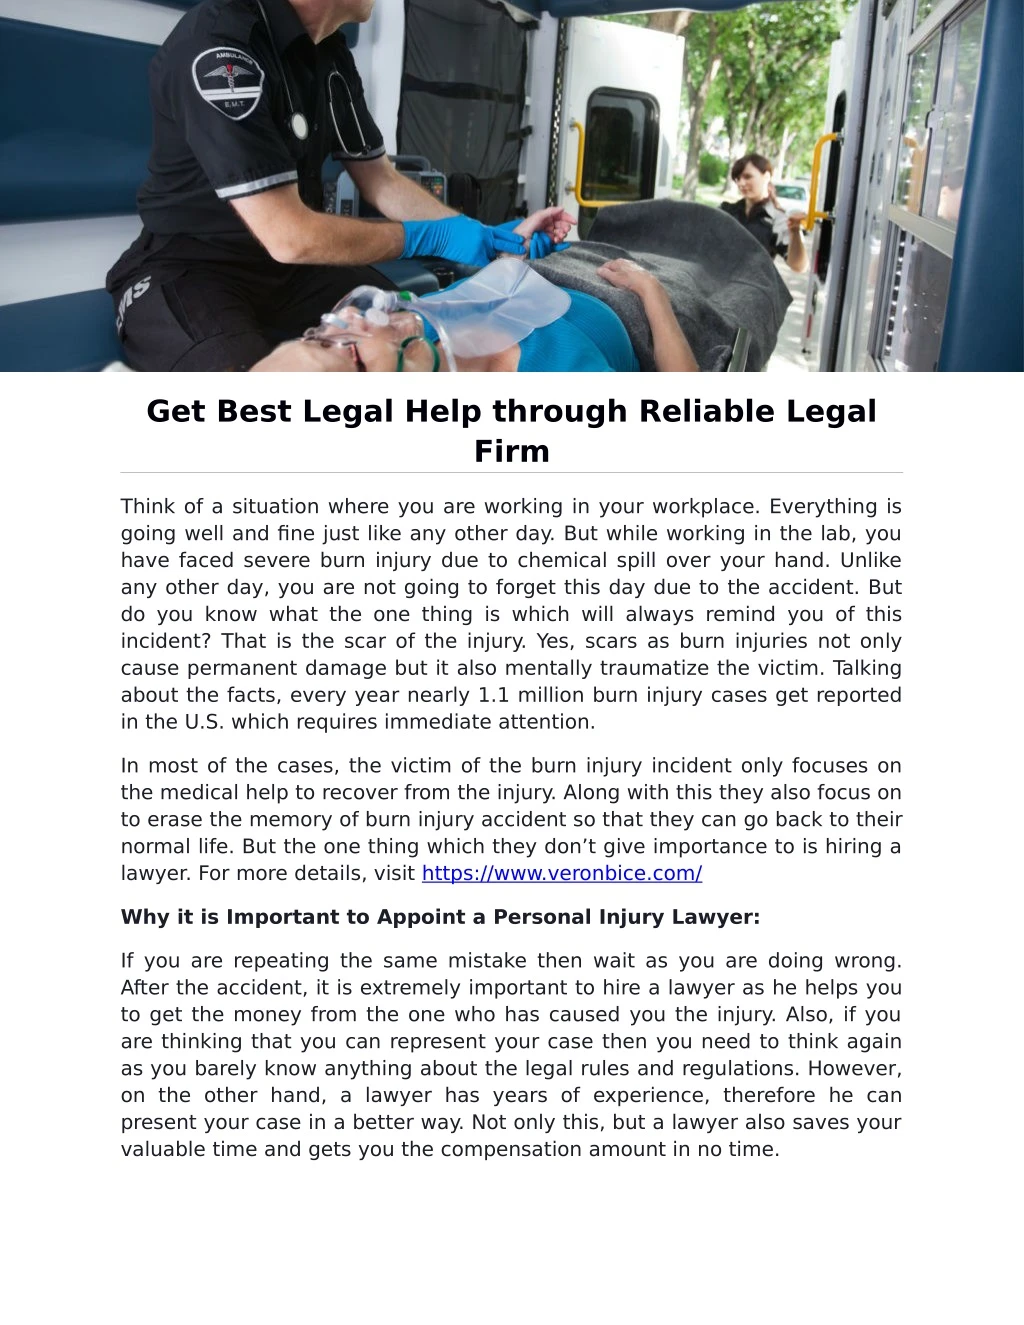 get best legal help through reliable legal firm